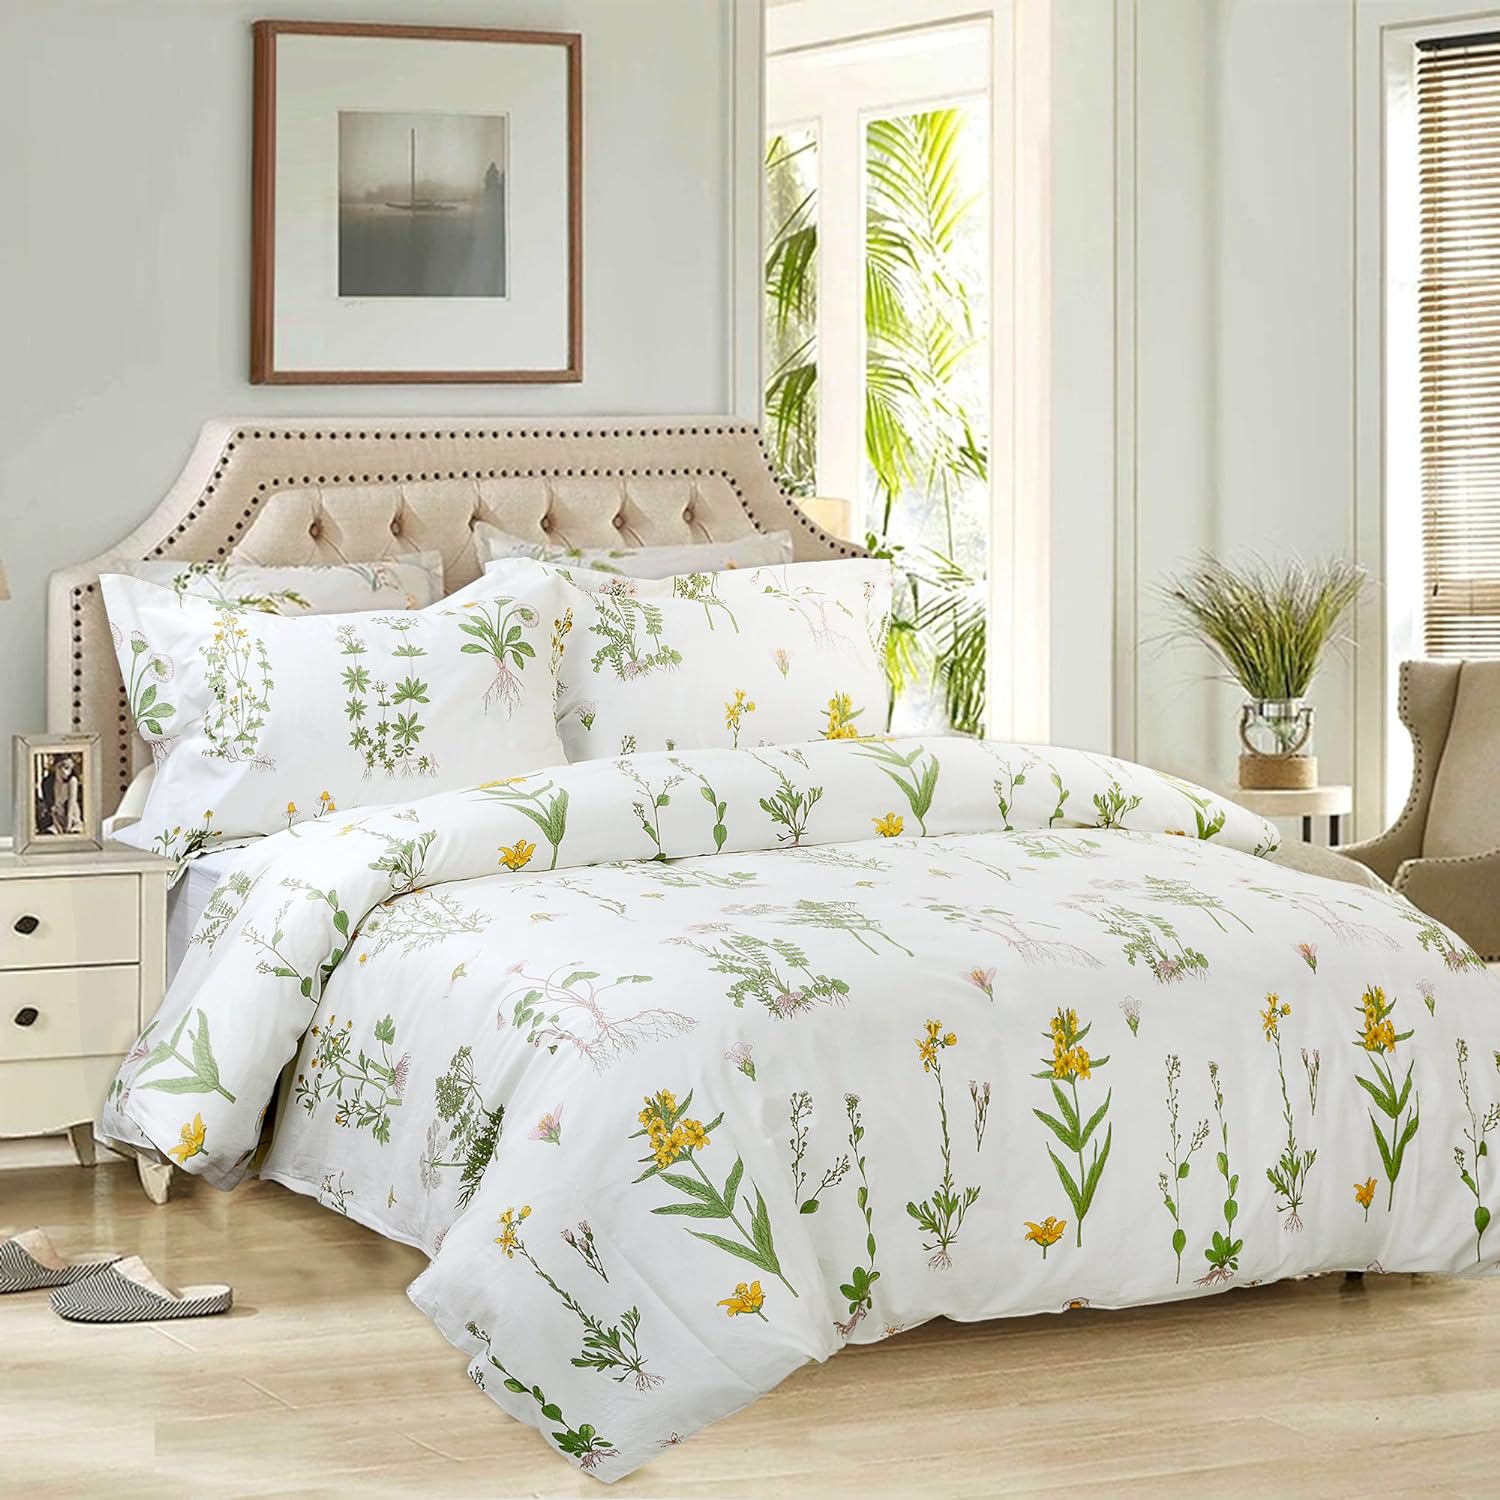 FADFAY Shabby Floral Duvet Cover Set White and Green Cotton Bedding Set with Hidden Zipper Closure 3 Pieces, 1duvet Cover & 2pillowcases (Queen Size, Simple Style)